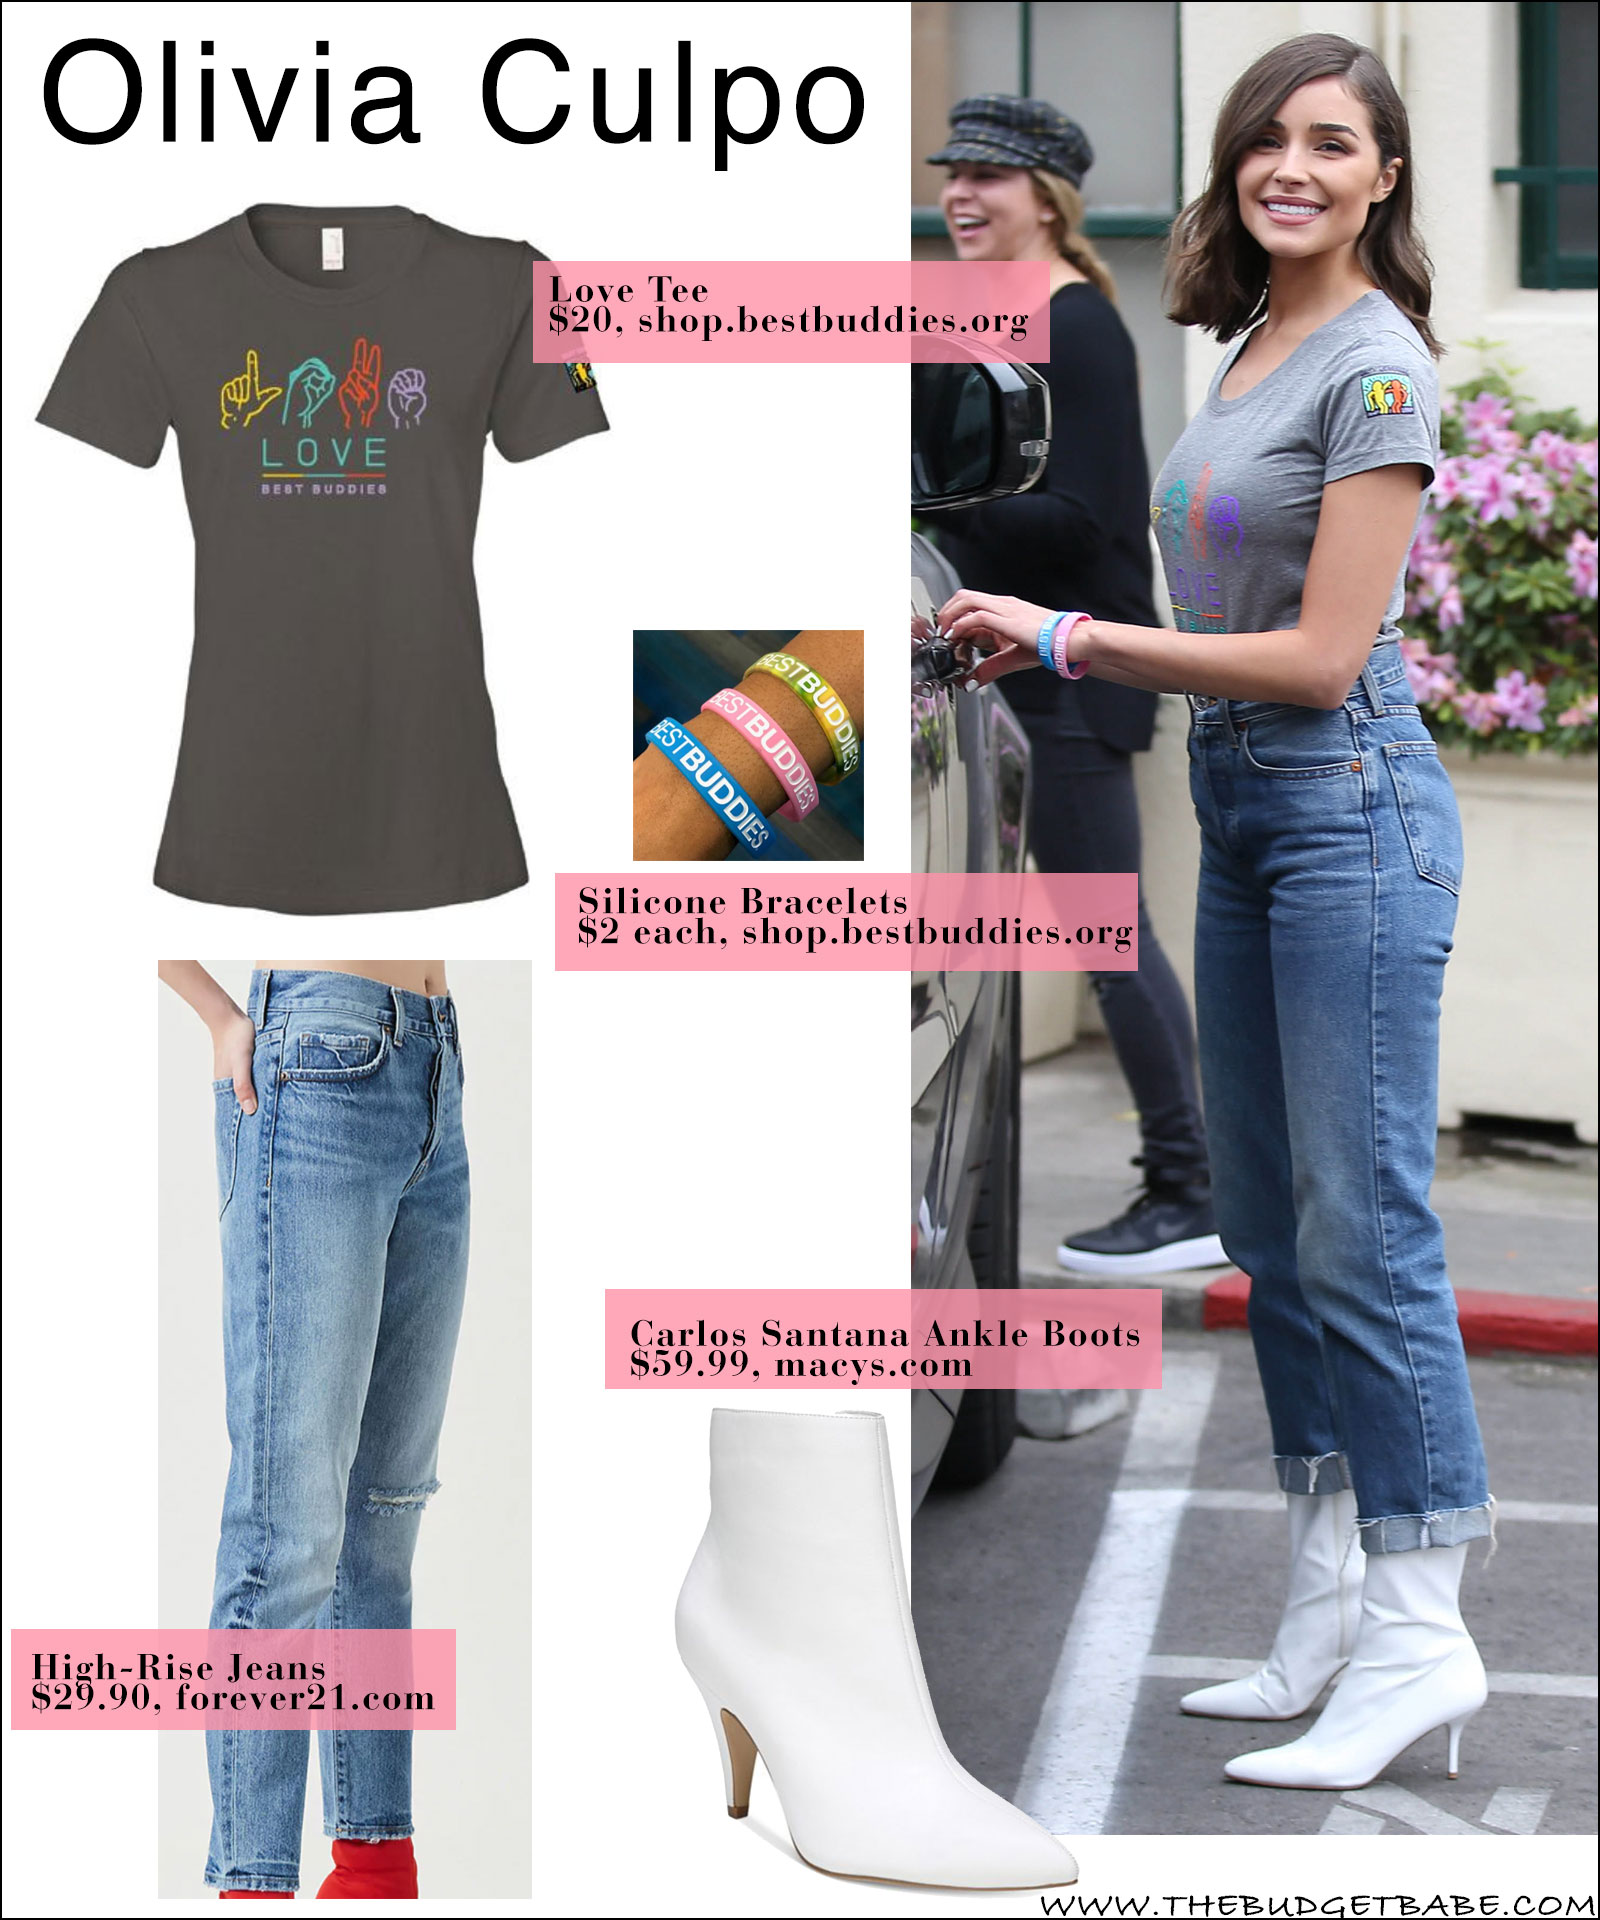 Olivia Culpo wears a Love Best Buddies T-Shirt with high waist jeans and white ankle boots